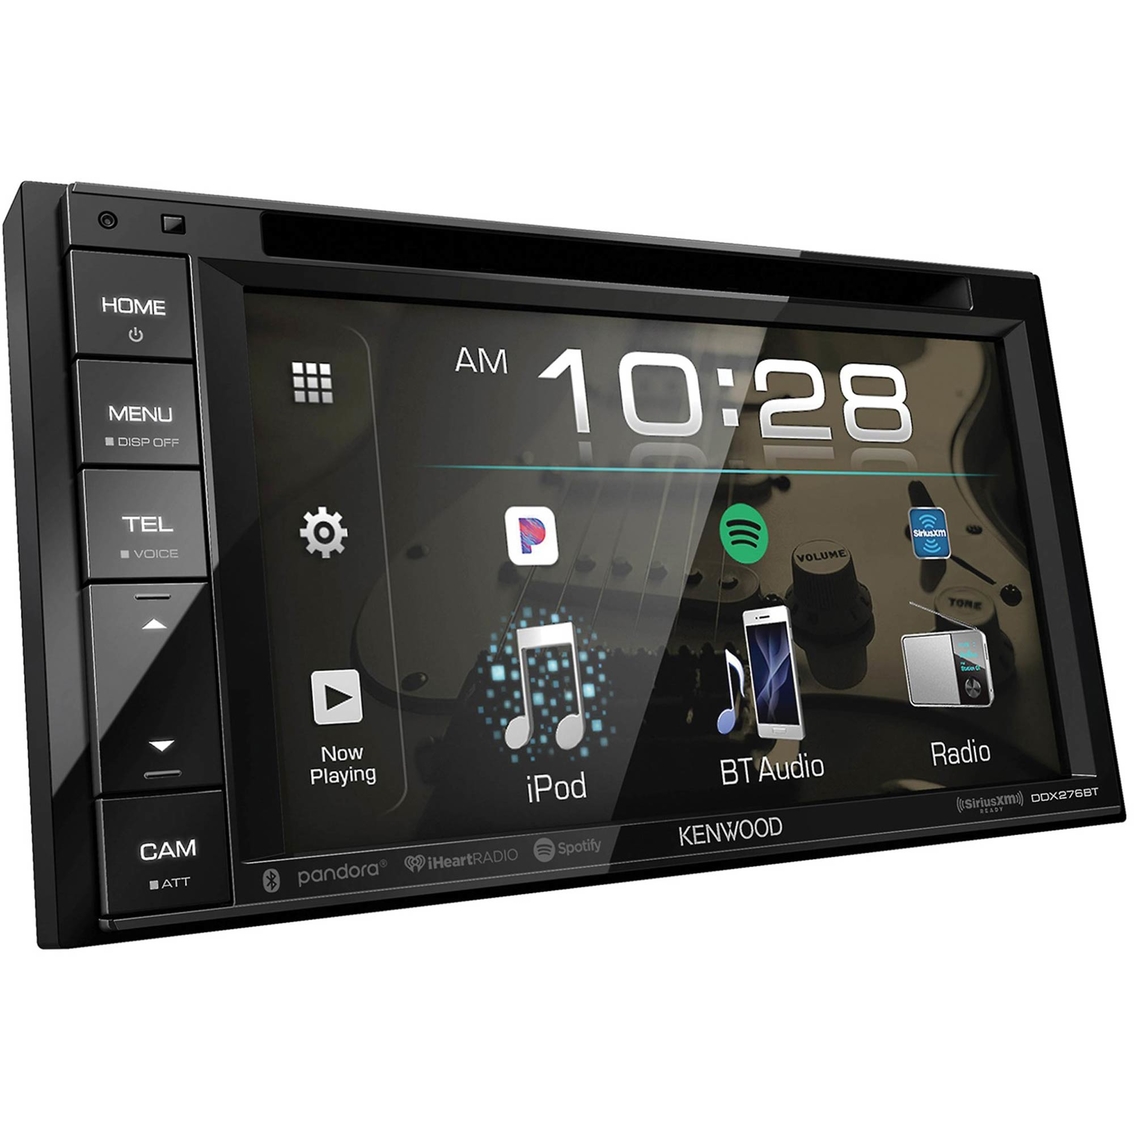 Kenwood 6.2 in. Double-DIN In-Dash DVD Receiver with Bluetooth & SiriusXM Ready - Image 4 of 7